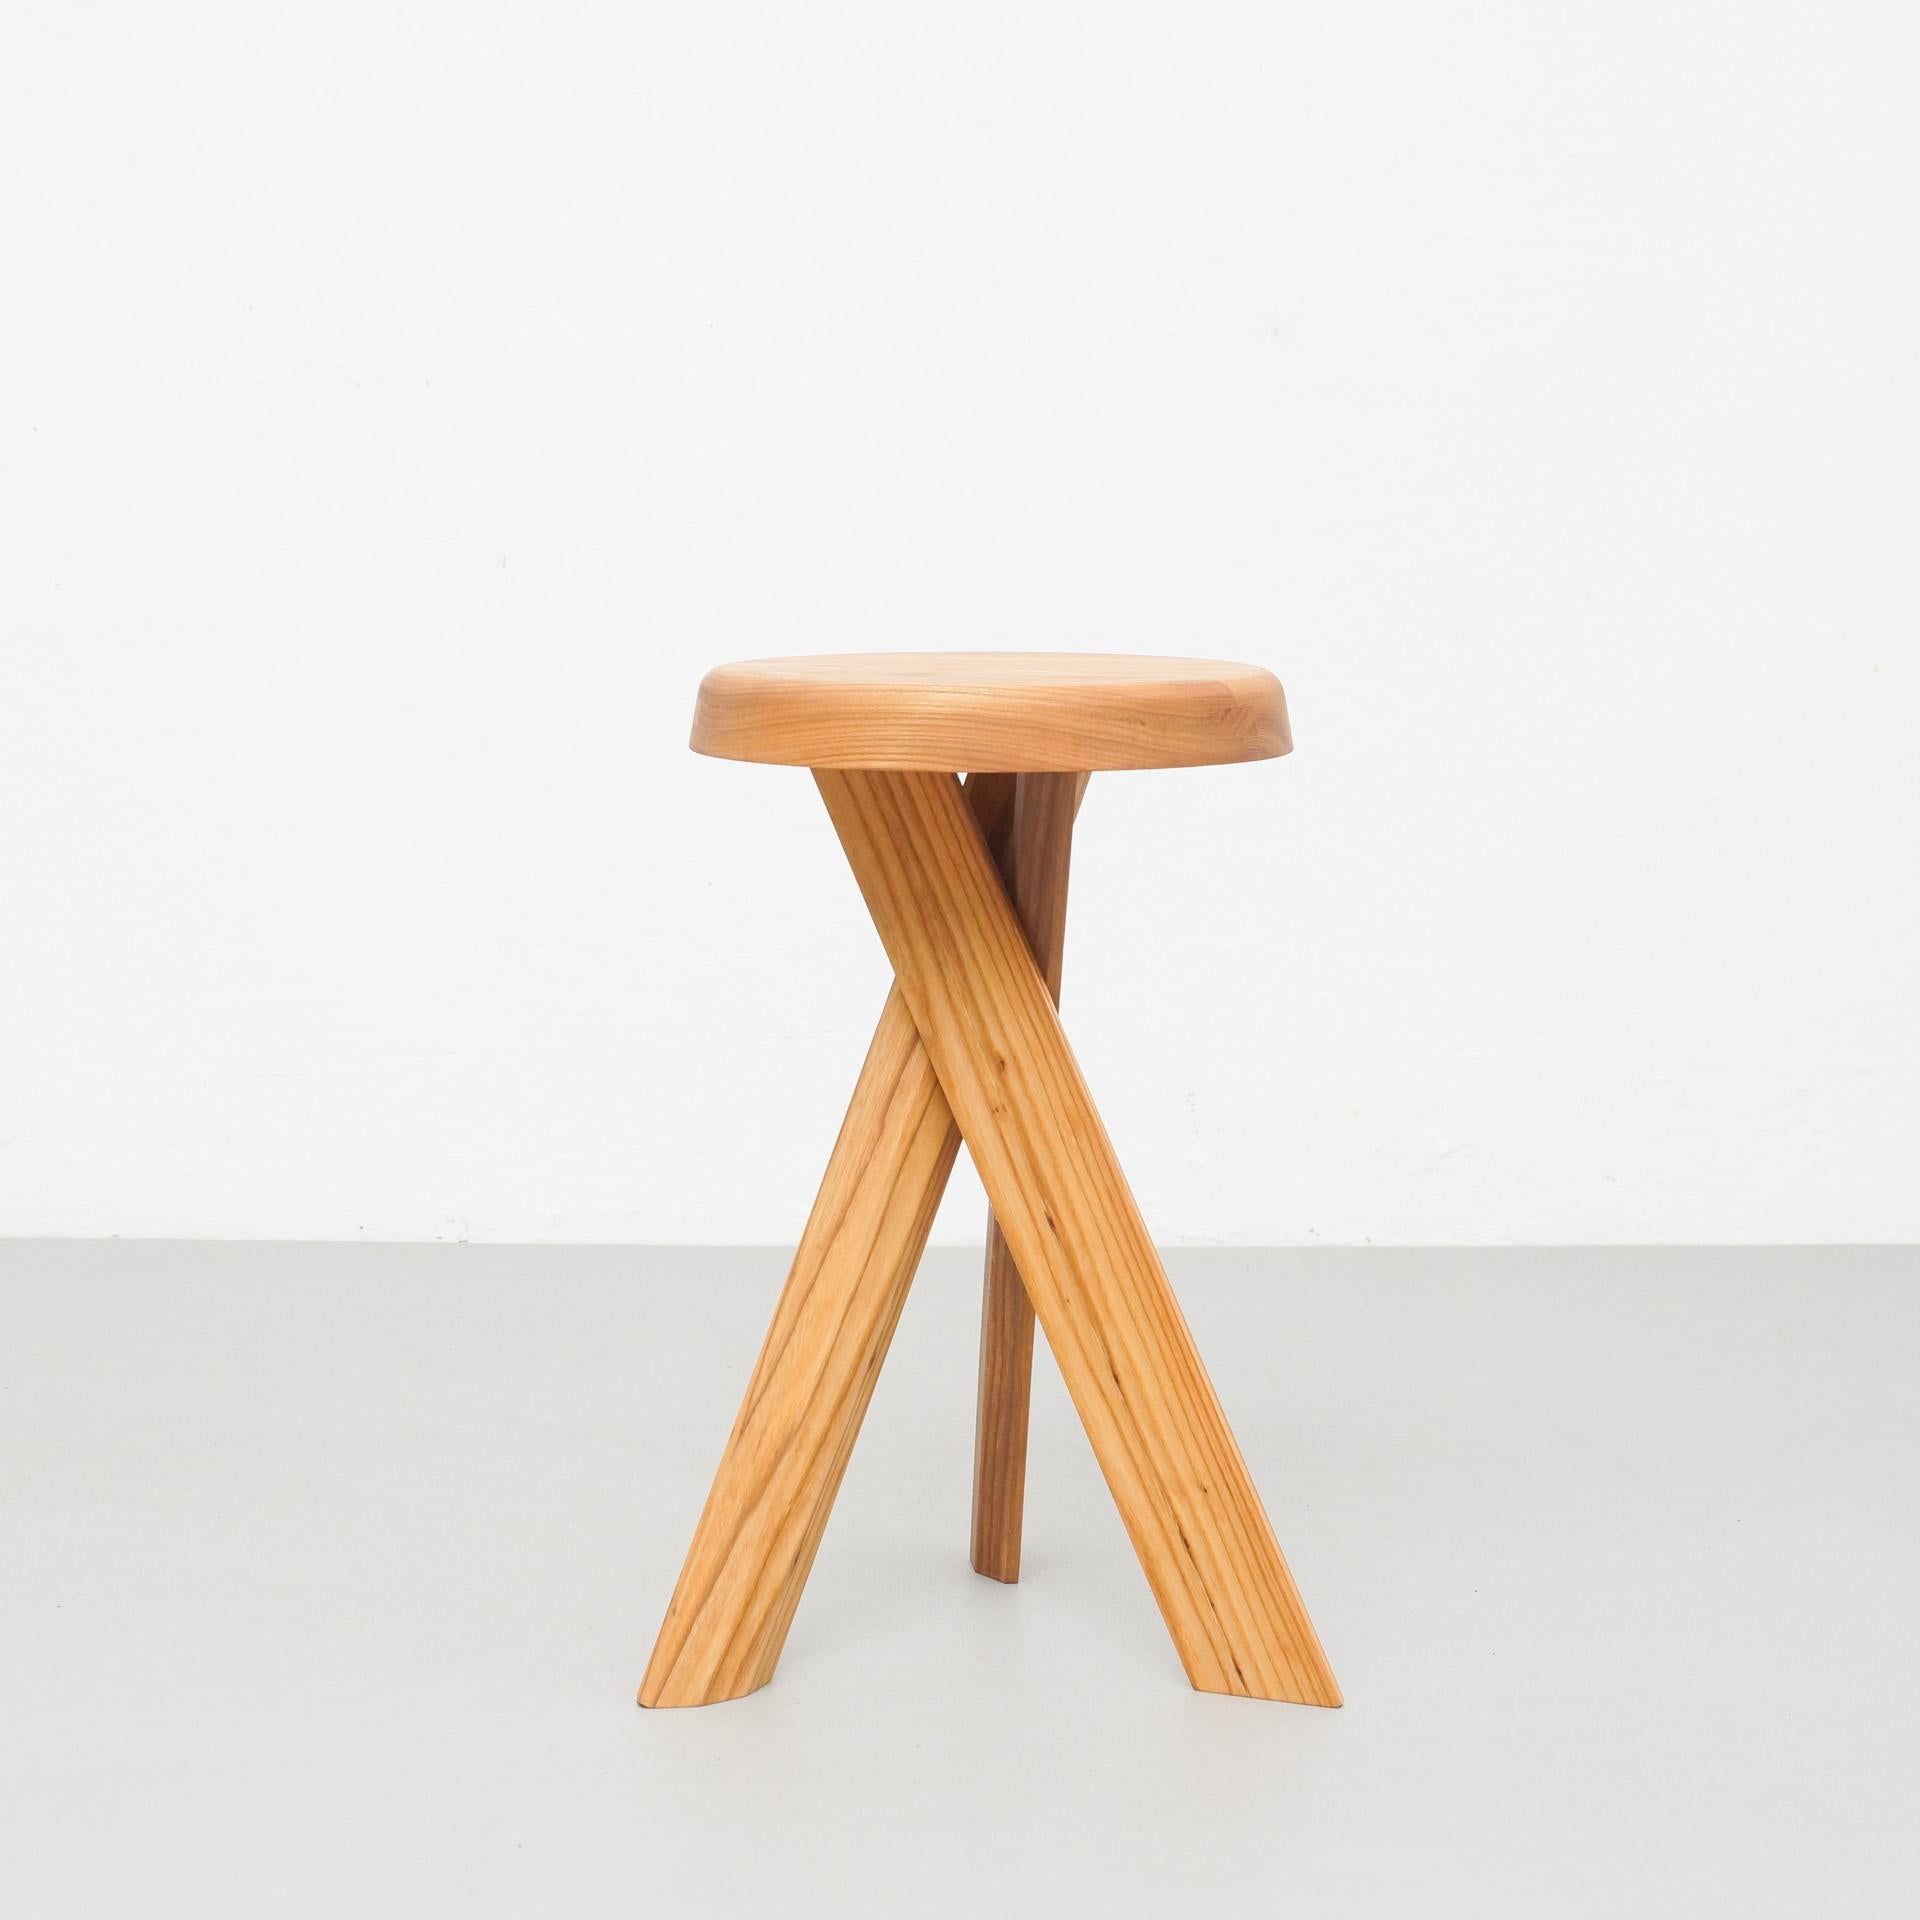 S 31 A stool designed by Pierre Chapo, circa 1960.
Manufactured by Chapo Creation in France, 2020.
Stamped solid elmwood.

In good original condition, with minor wear consistent with age and use, preserving a beautiful patina.

Pierre Chapo is